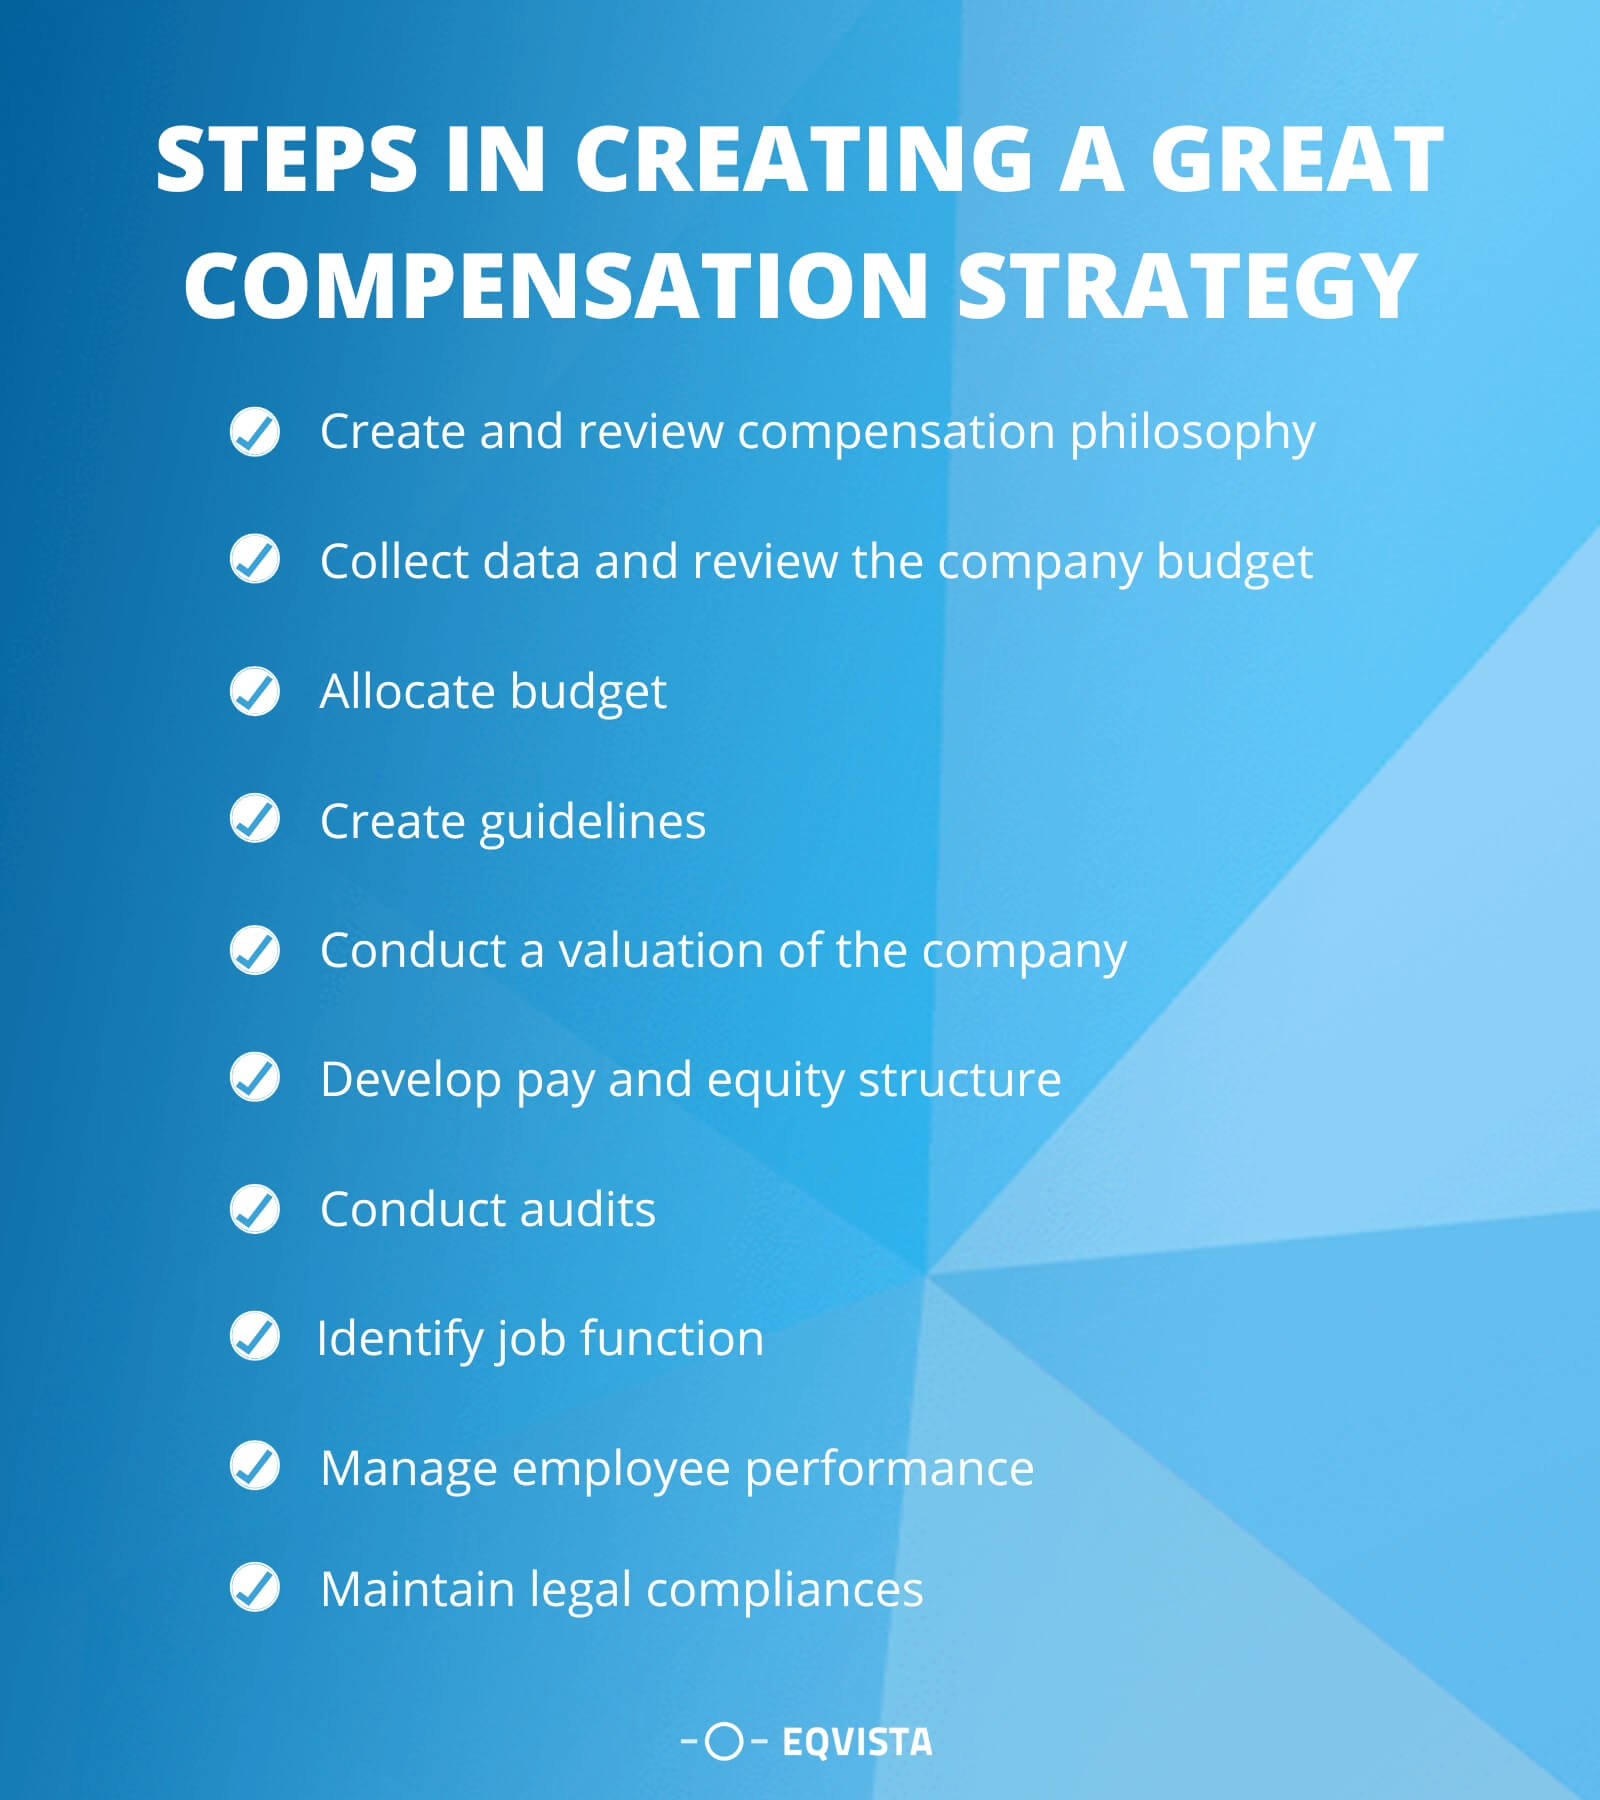 Developing a compensation plan: Setting a pay philosophy